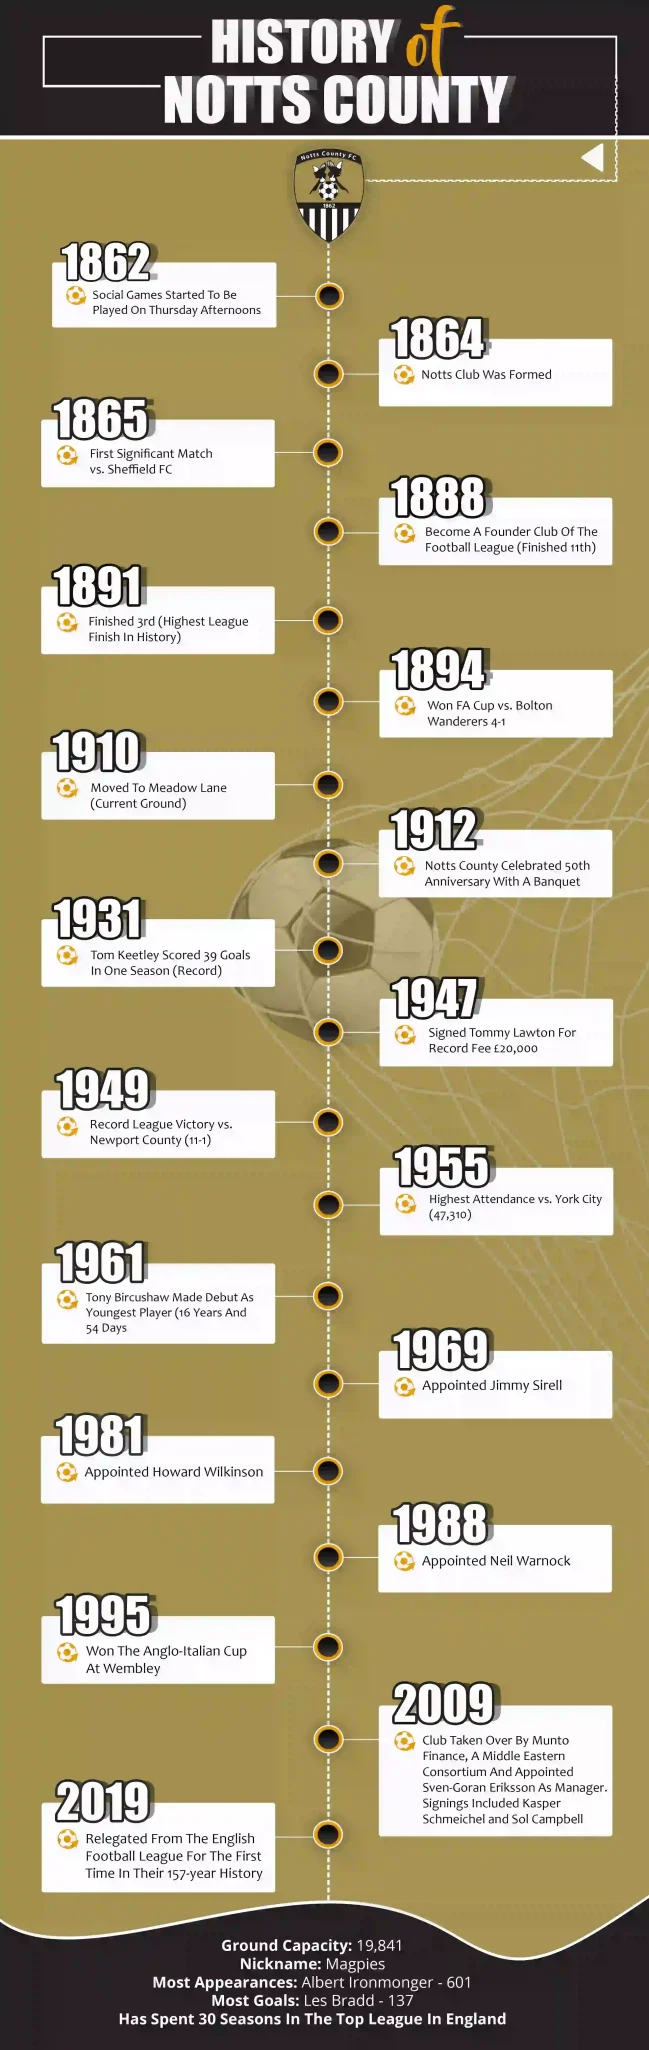 history of notts county football club infographic